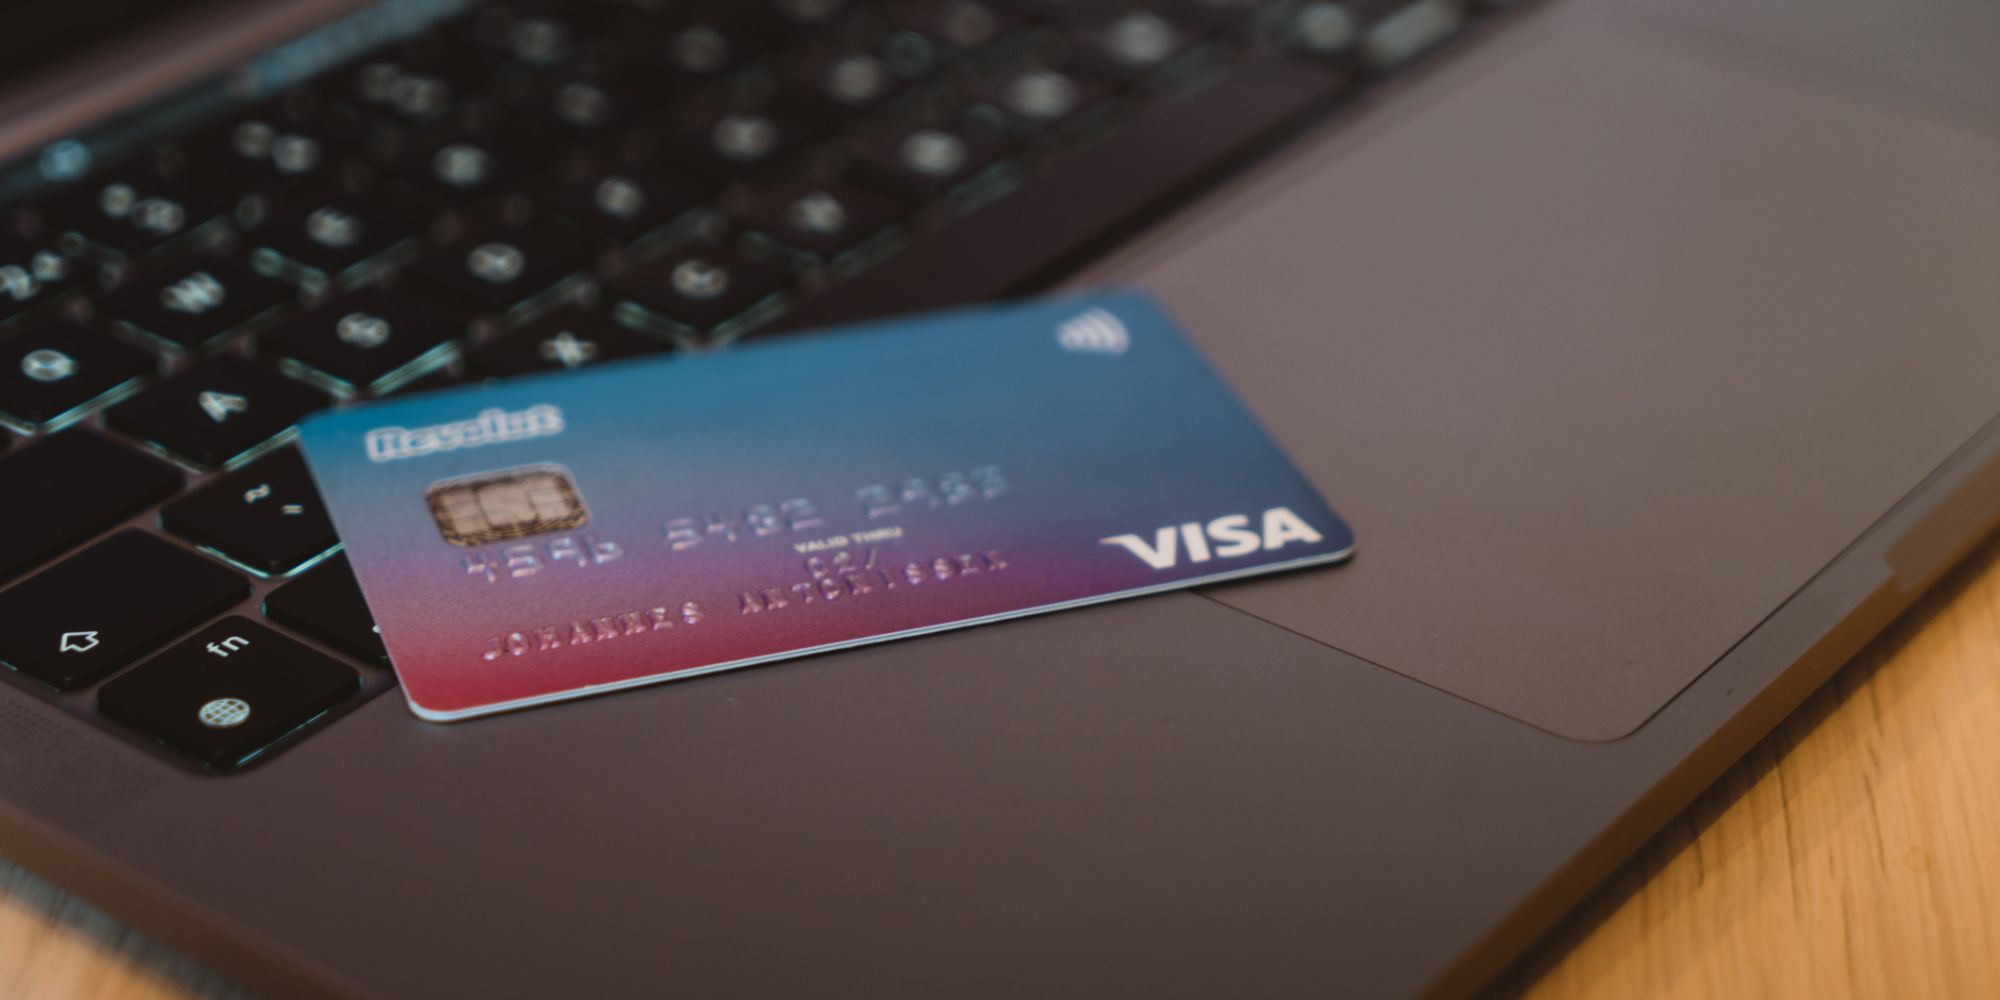 Photo of a Visa card on a laptop